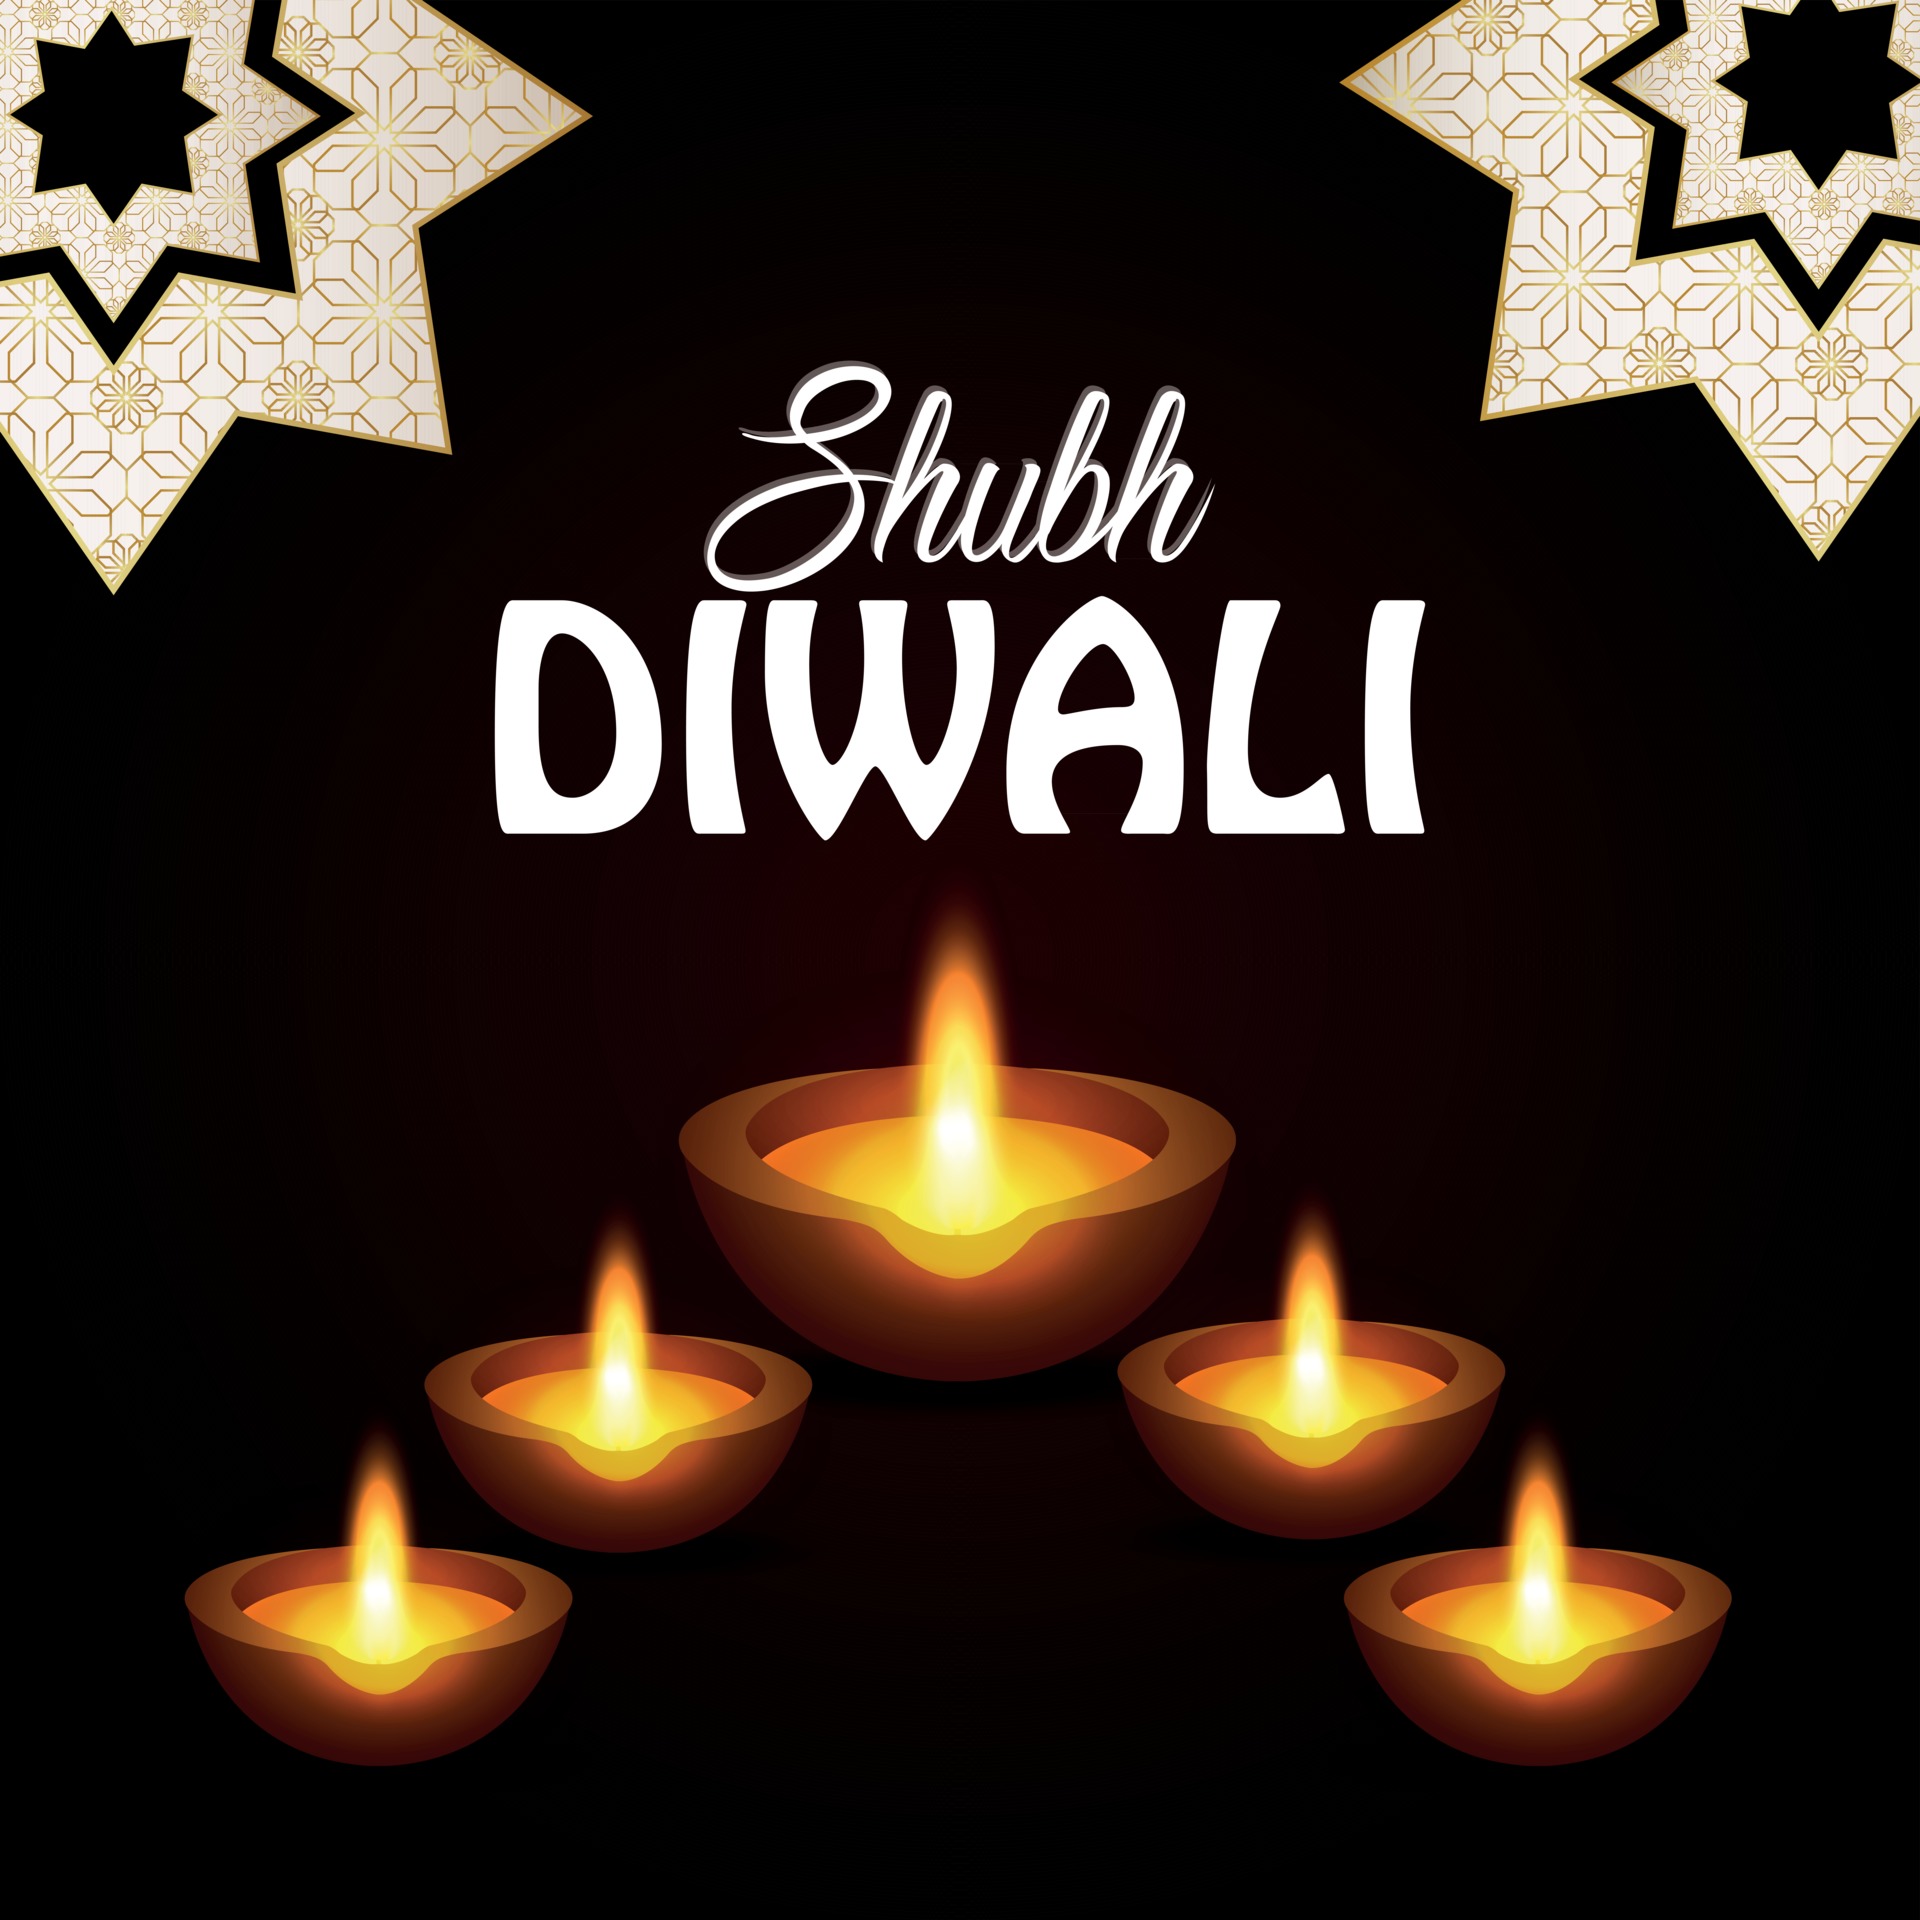 Shubh diwali celebration background with diwali oil lamp on creative  background 2517873 Vector Art at Vecteezy